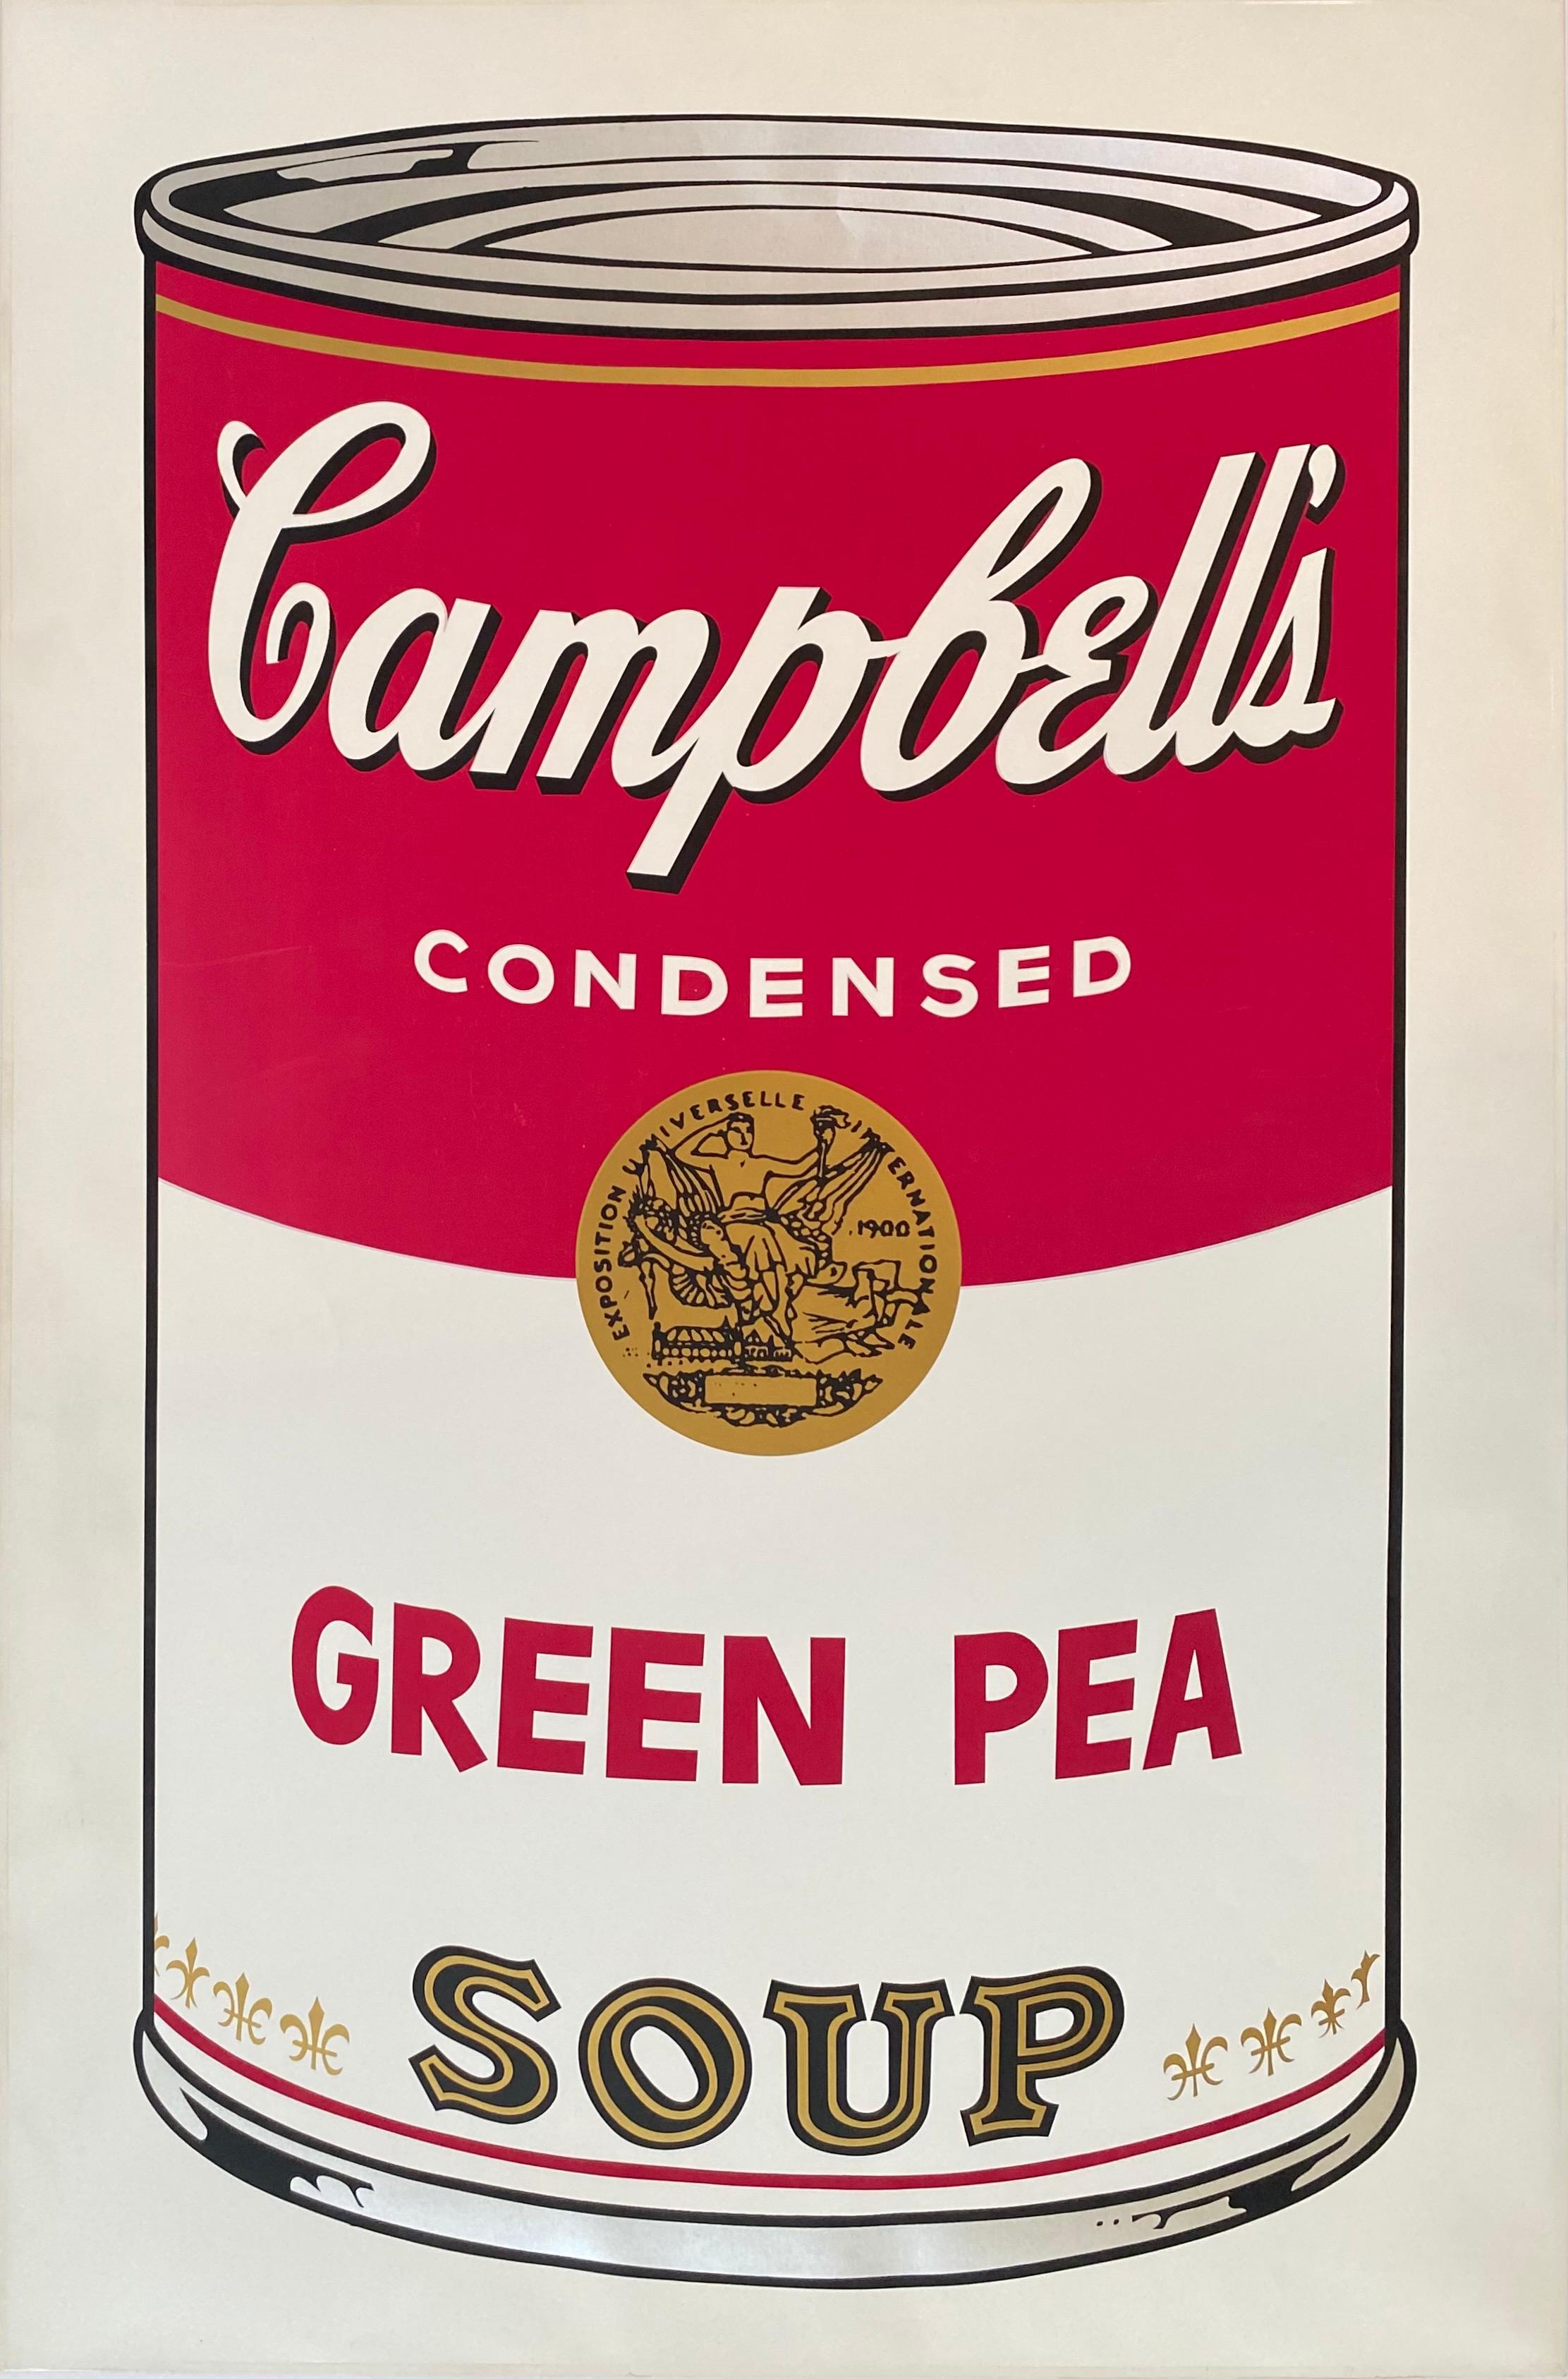 Andy Warhol Print - Green Pea from Campbell's Soup I, F&S II.50